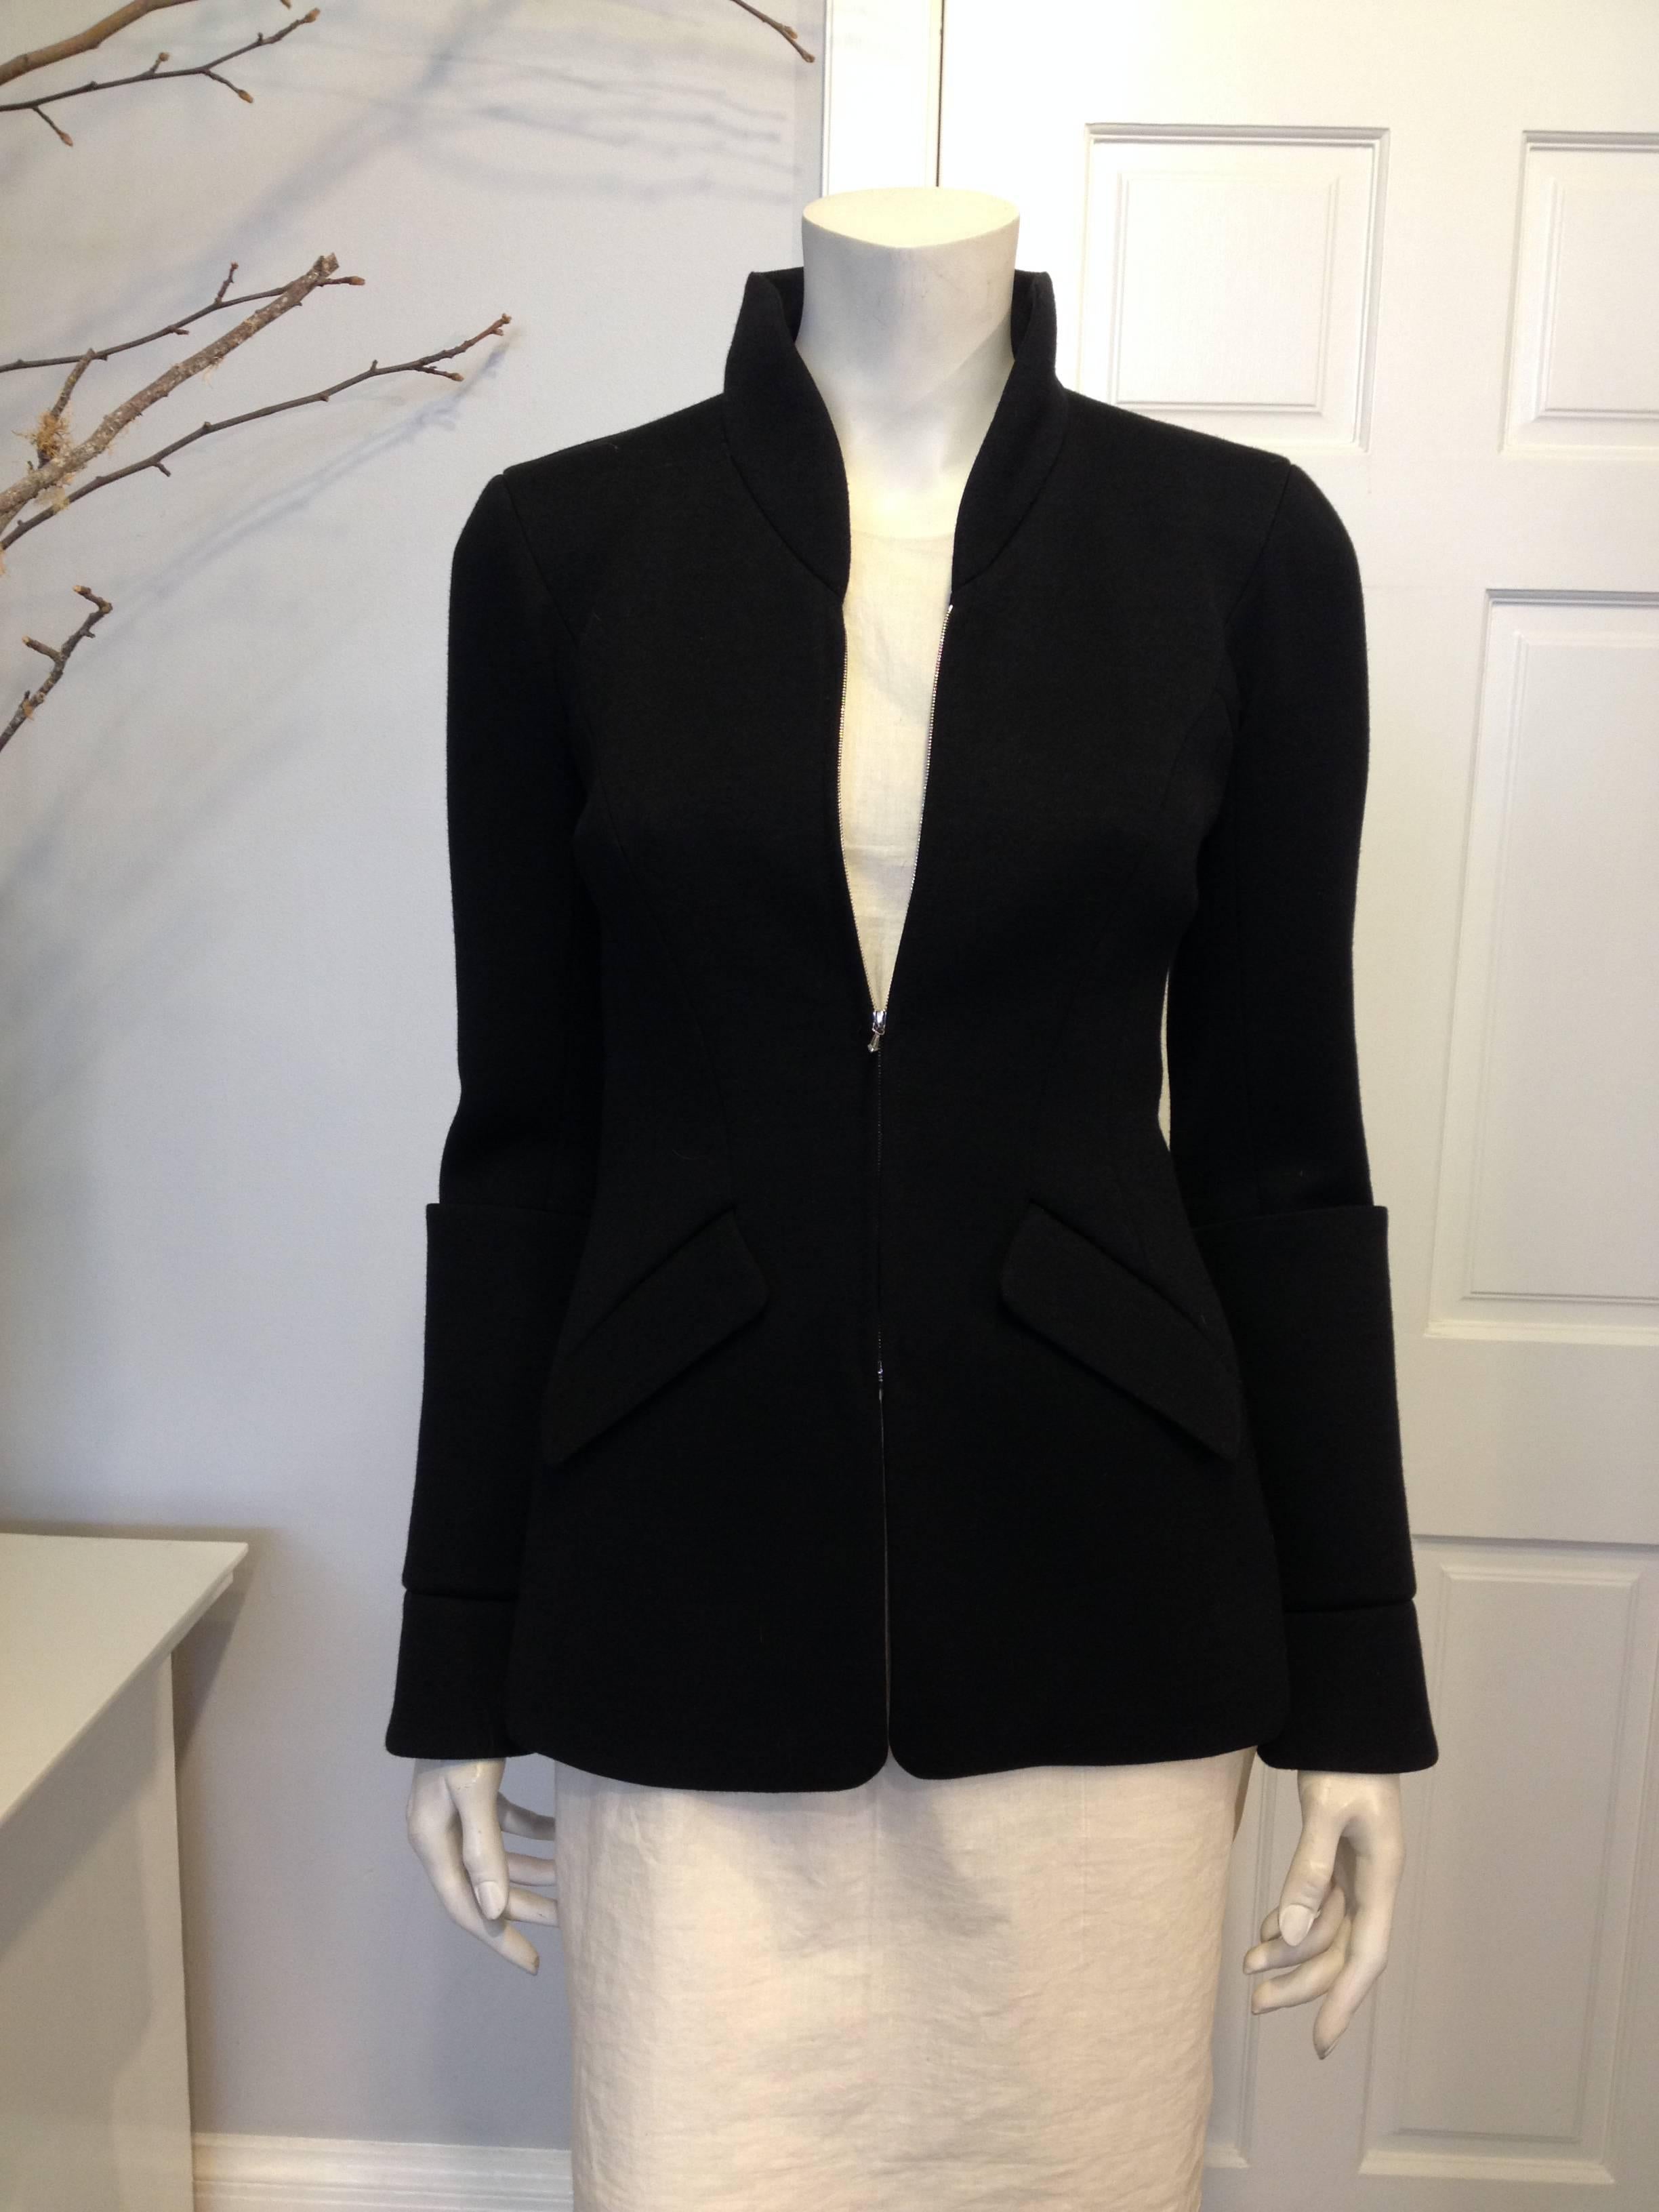 Women's Chanel Black Jacket with Zippers Size 36 (4) For Sale